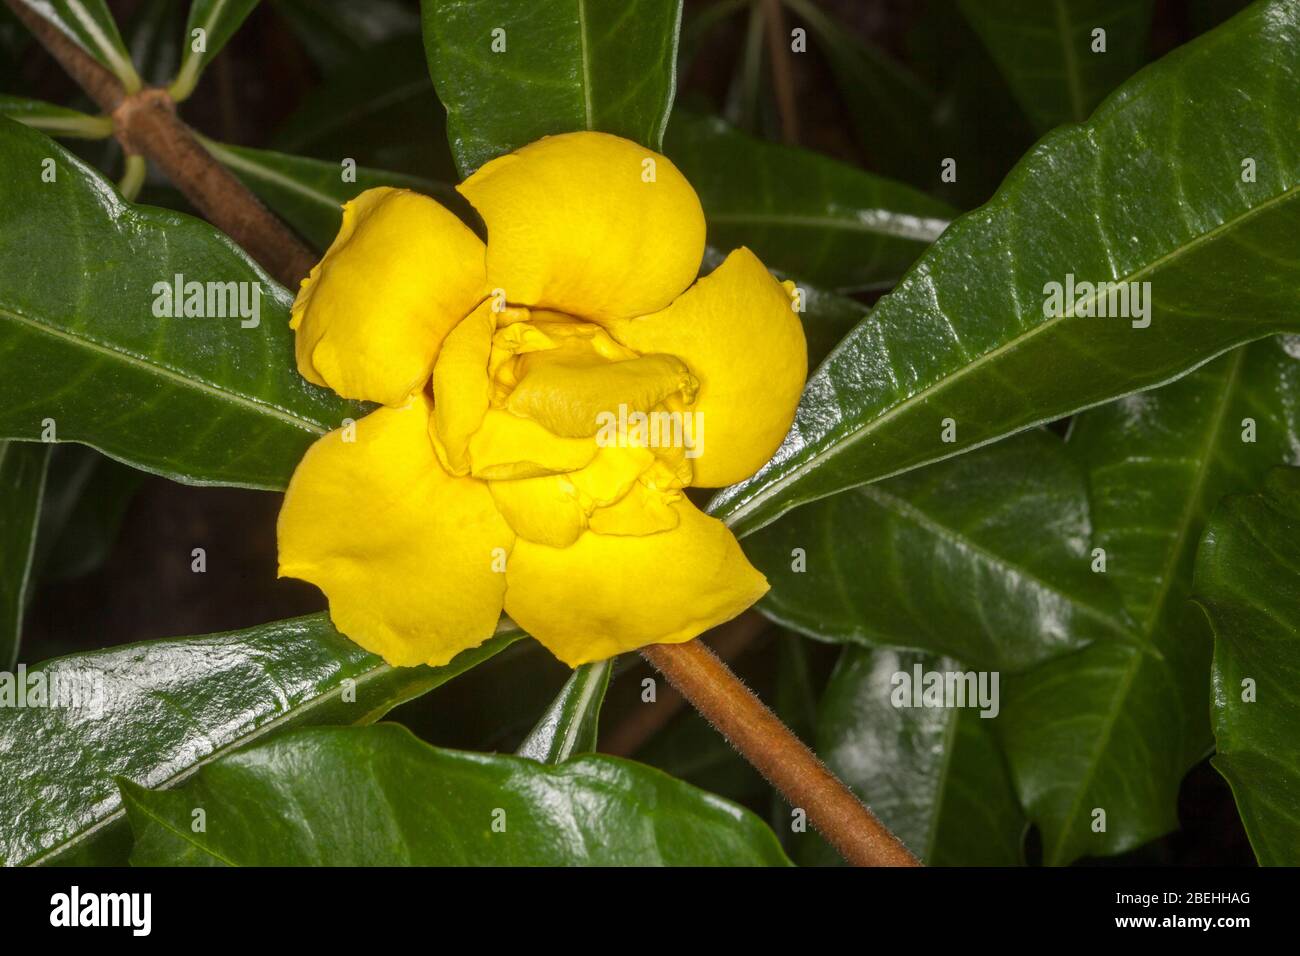 Vivid yellow double flower and glossy dark green leaves of unusual climbing plant, Allamanda cathartica 'Stanhill's Double' Stock Photo